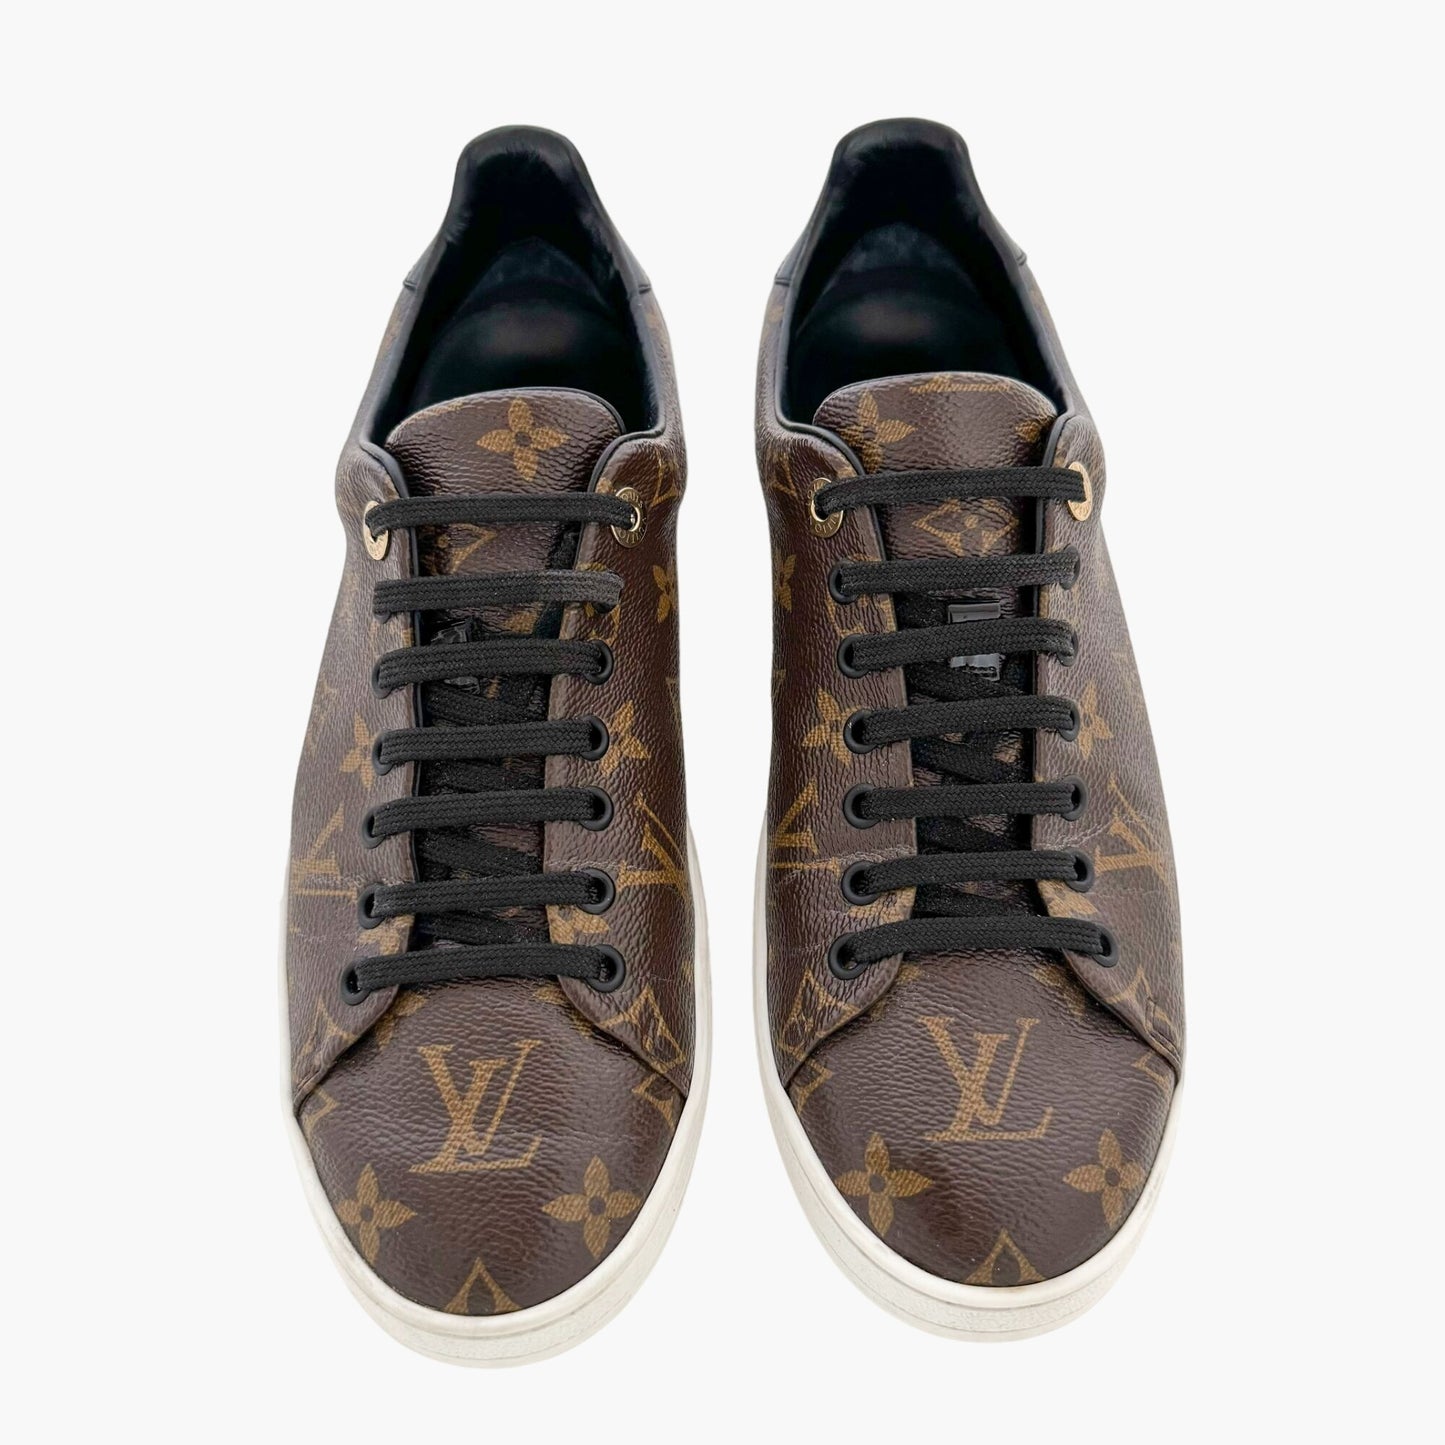 Louis Vuitton Frontrow Sneakers in Brown Monogram Size 40